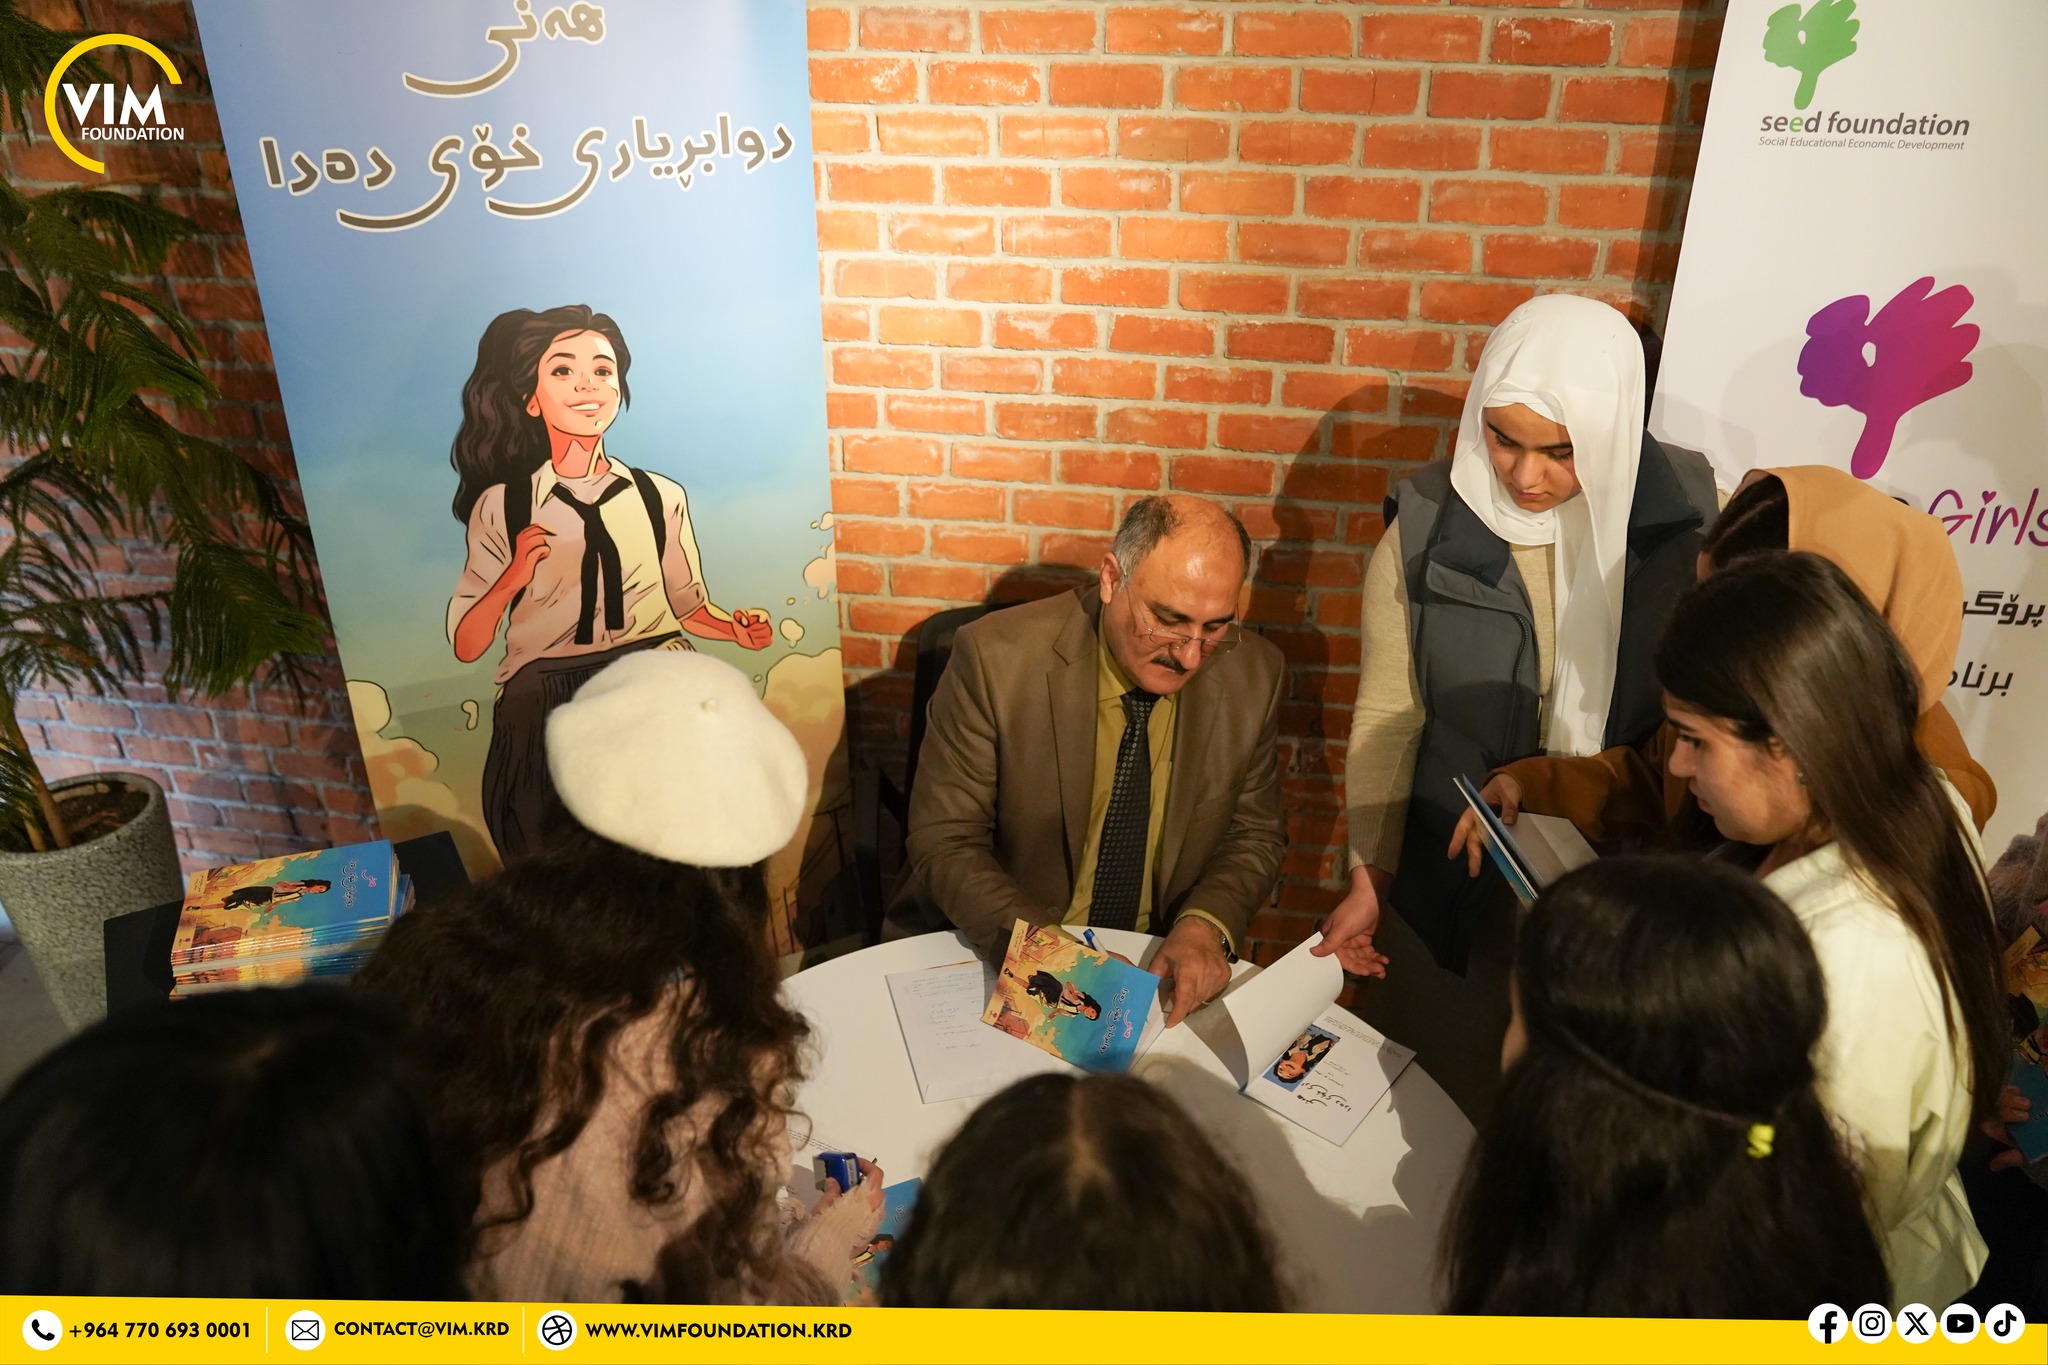 Book Launch Event for “Hani Made Her Final Decision” at Vim Foundation